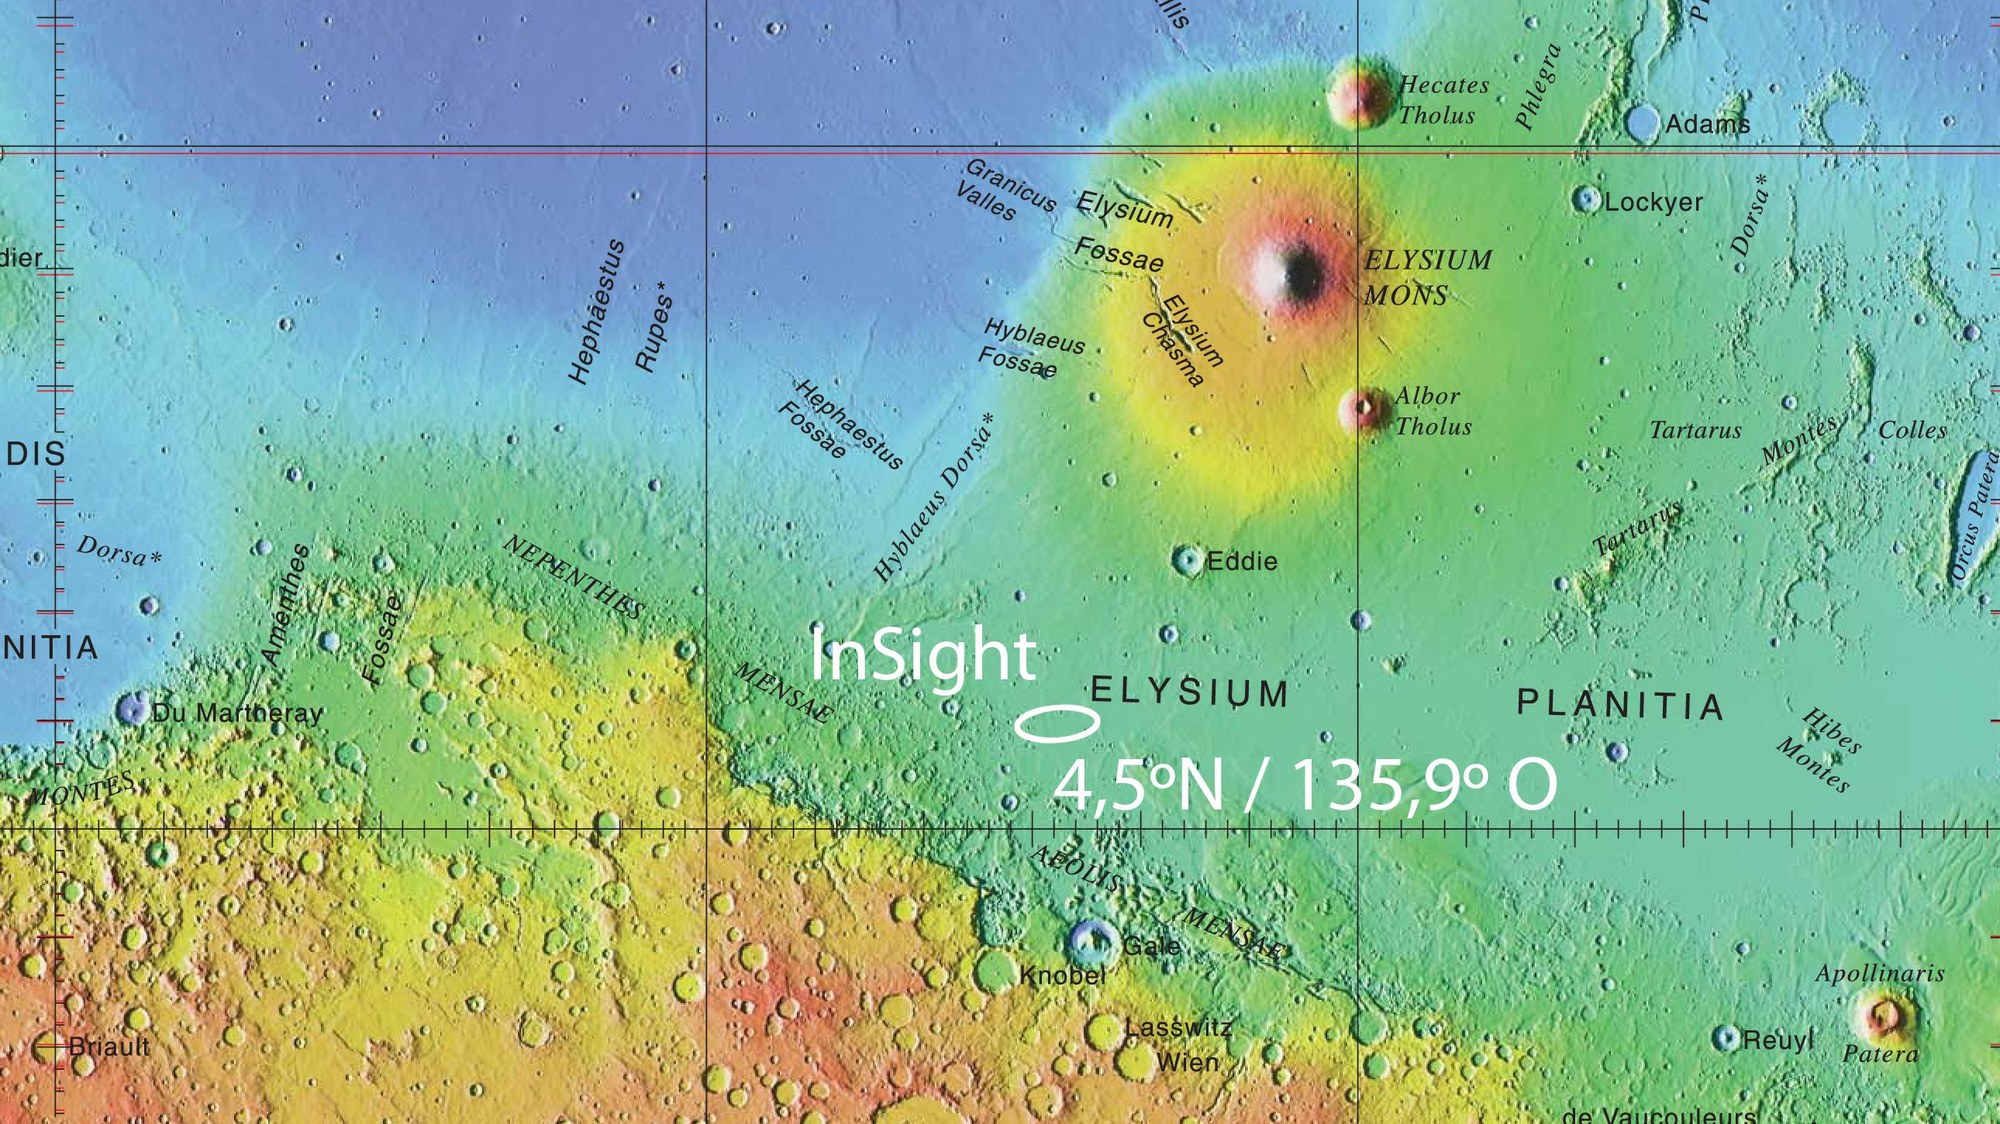 The landing site for the InSight mission in Elysium Planitia